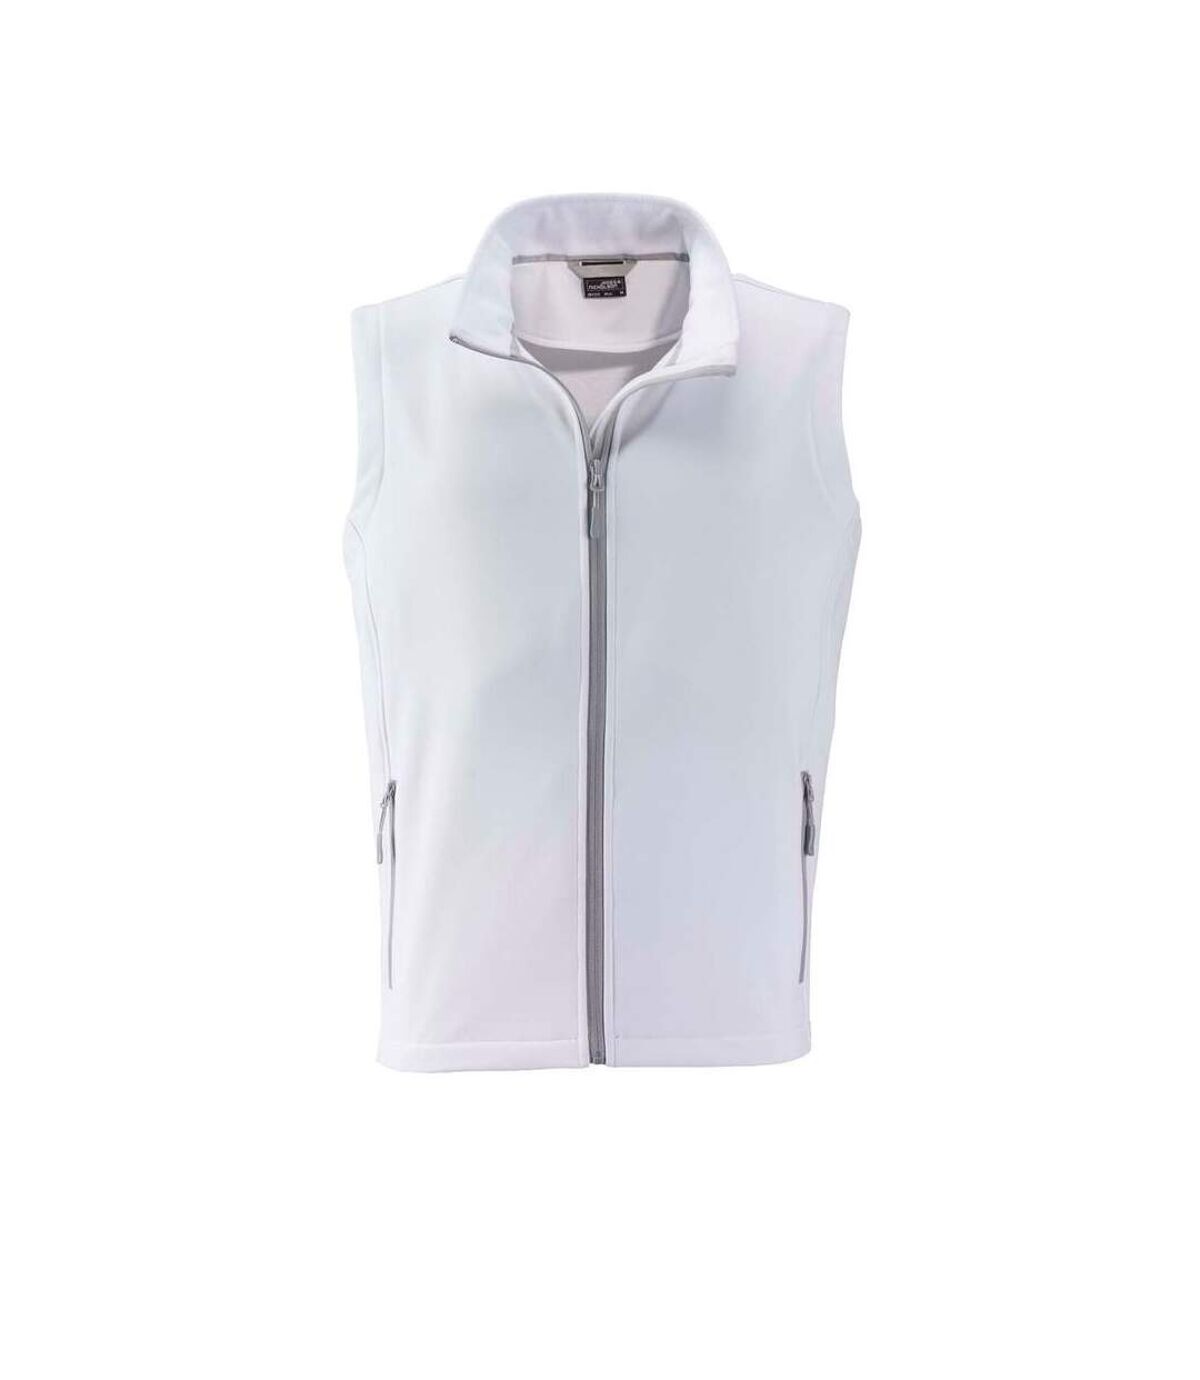 Gilet sans manches micropolaire softshell - JN1128 - blanc - Homme